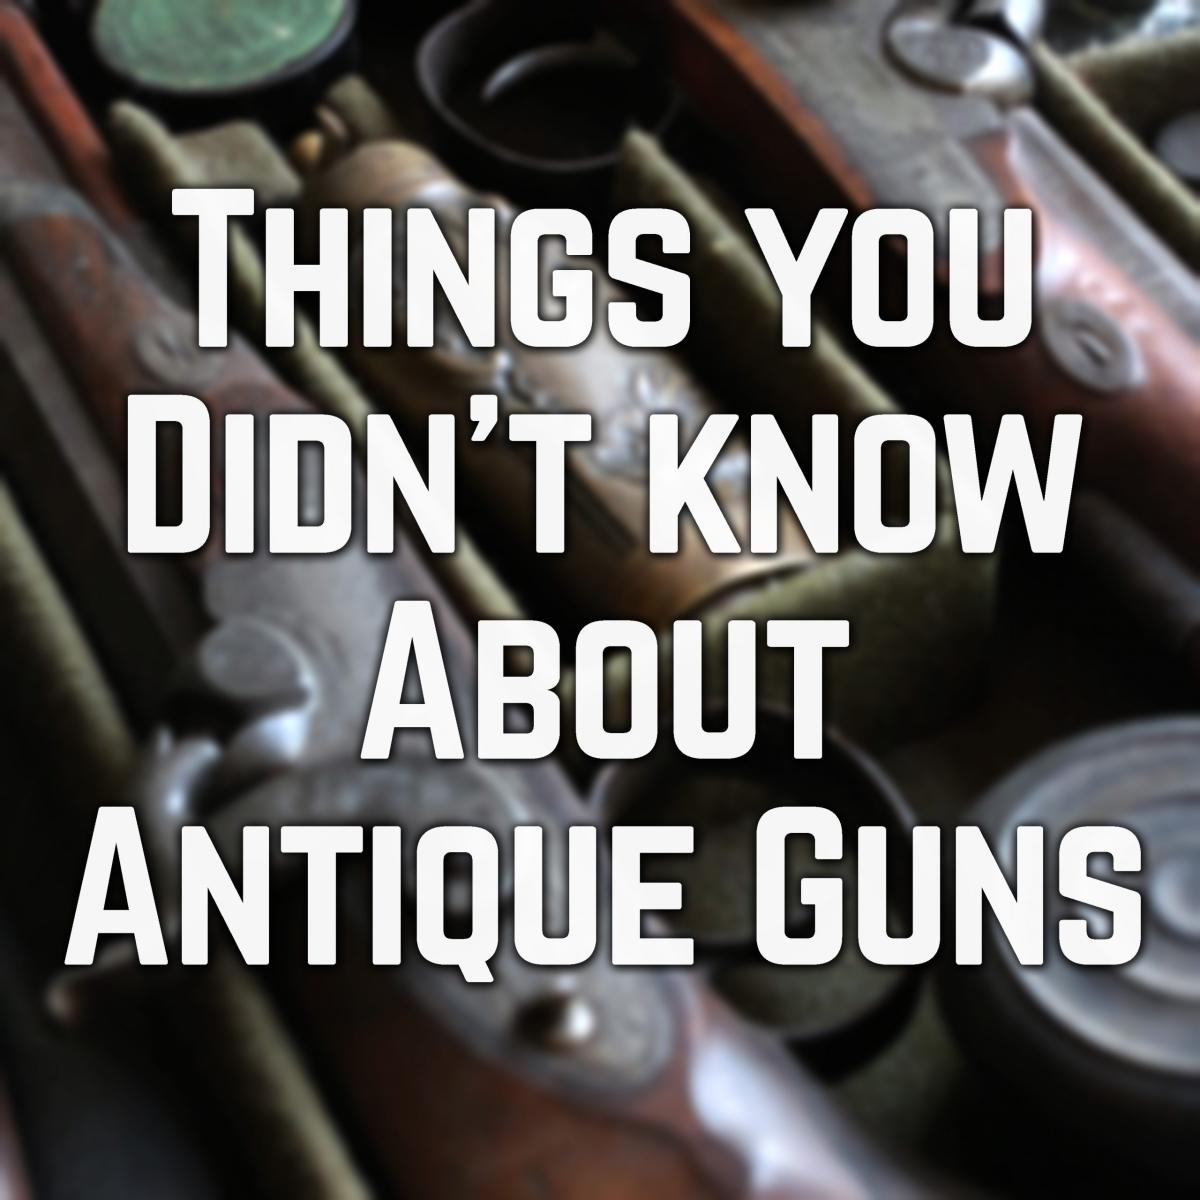 Things You Didn't Know About Antique Guns